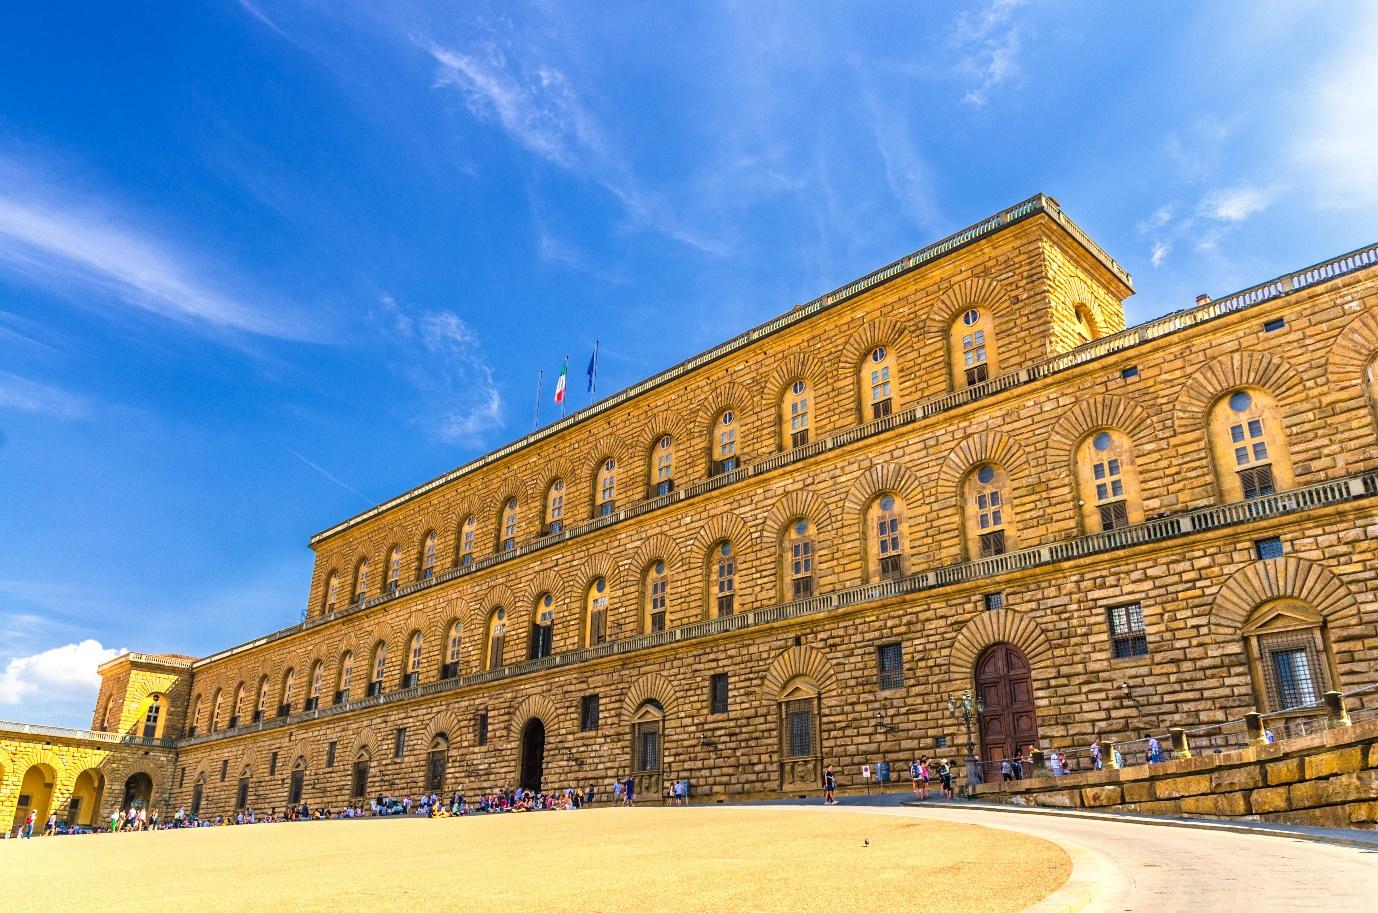 A large building with many windows with Palazzo Pitti in the background

Description automatically generated